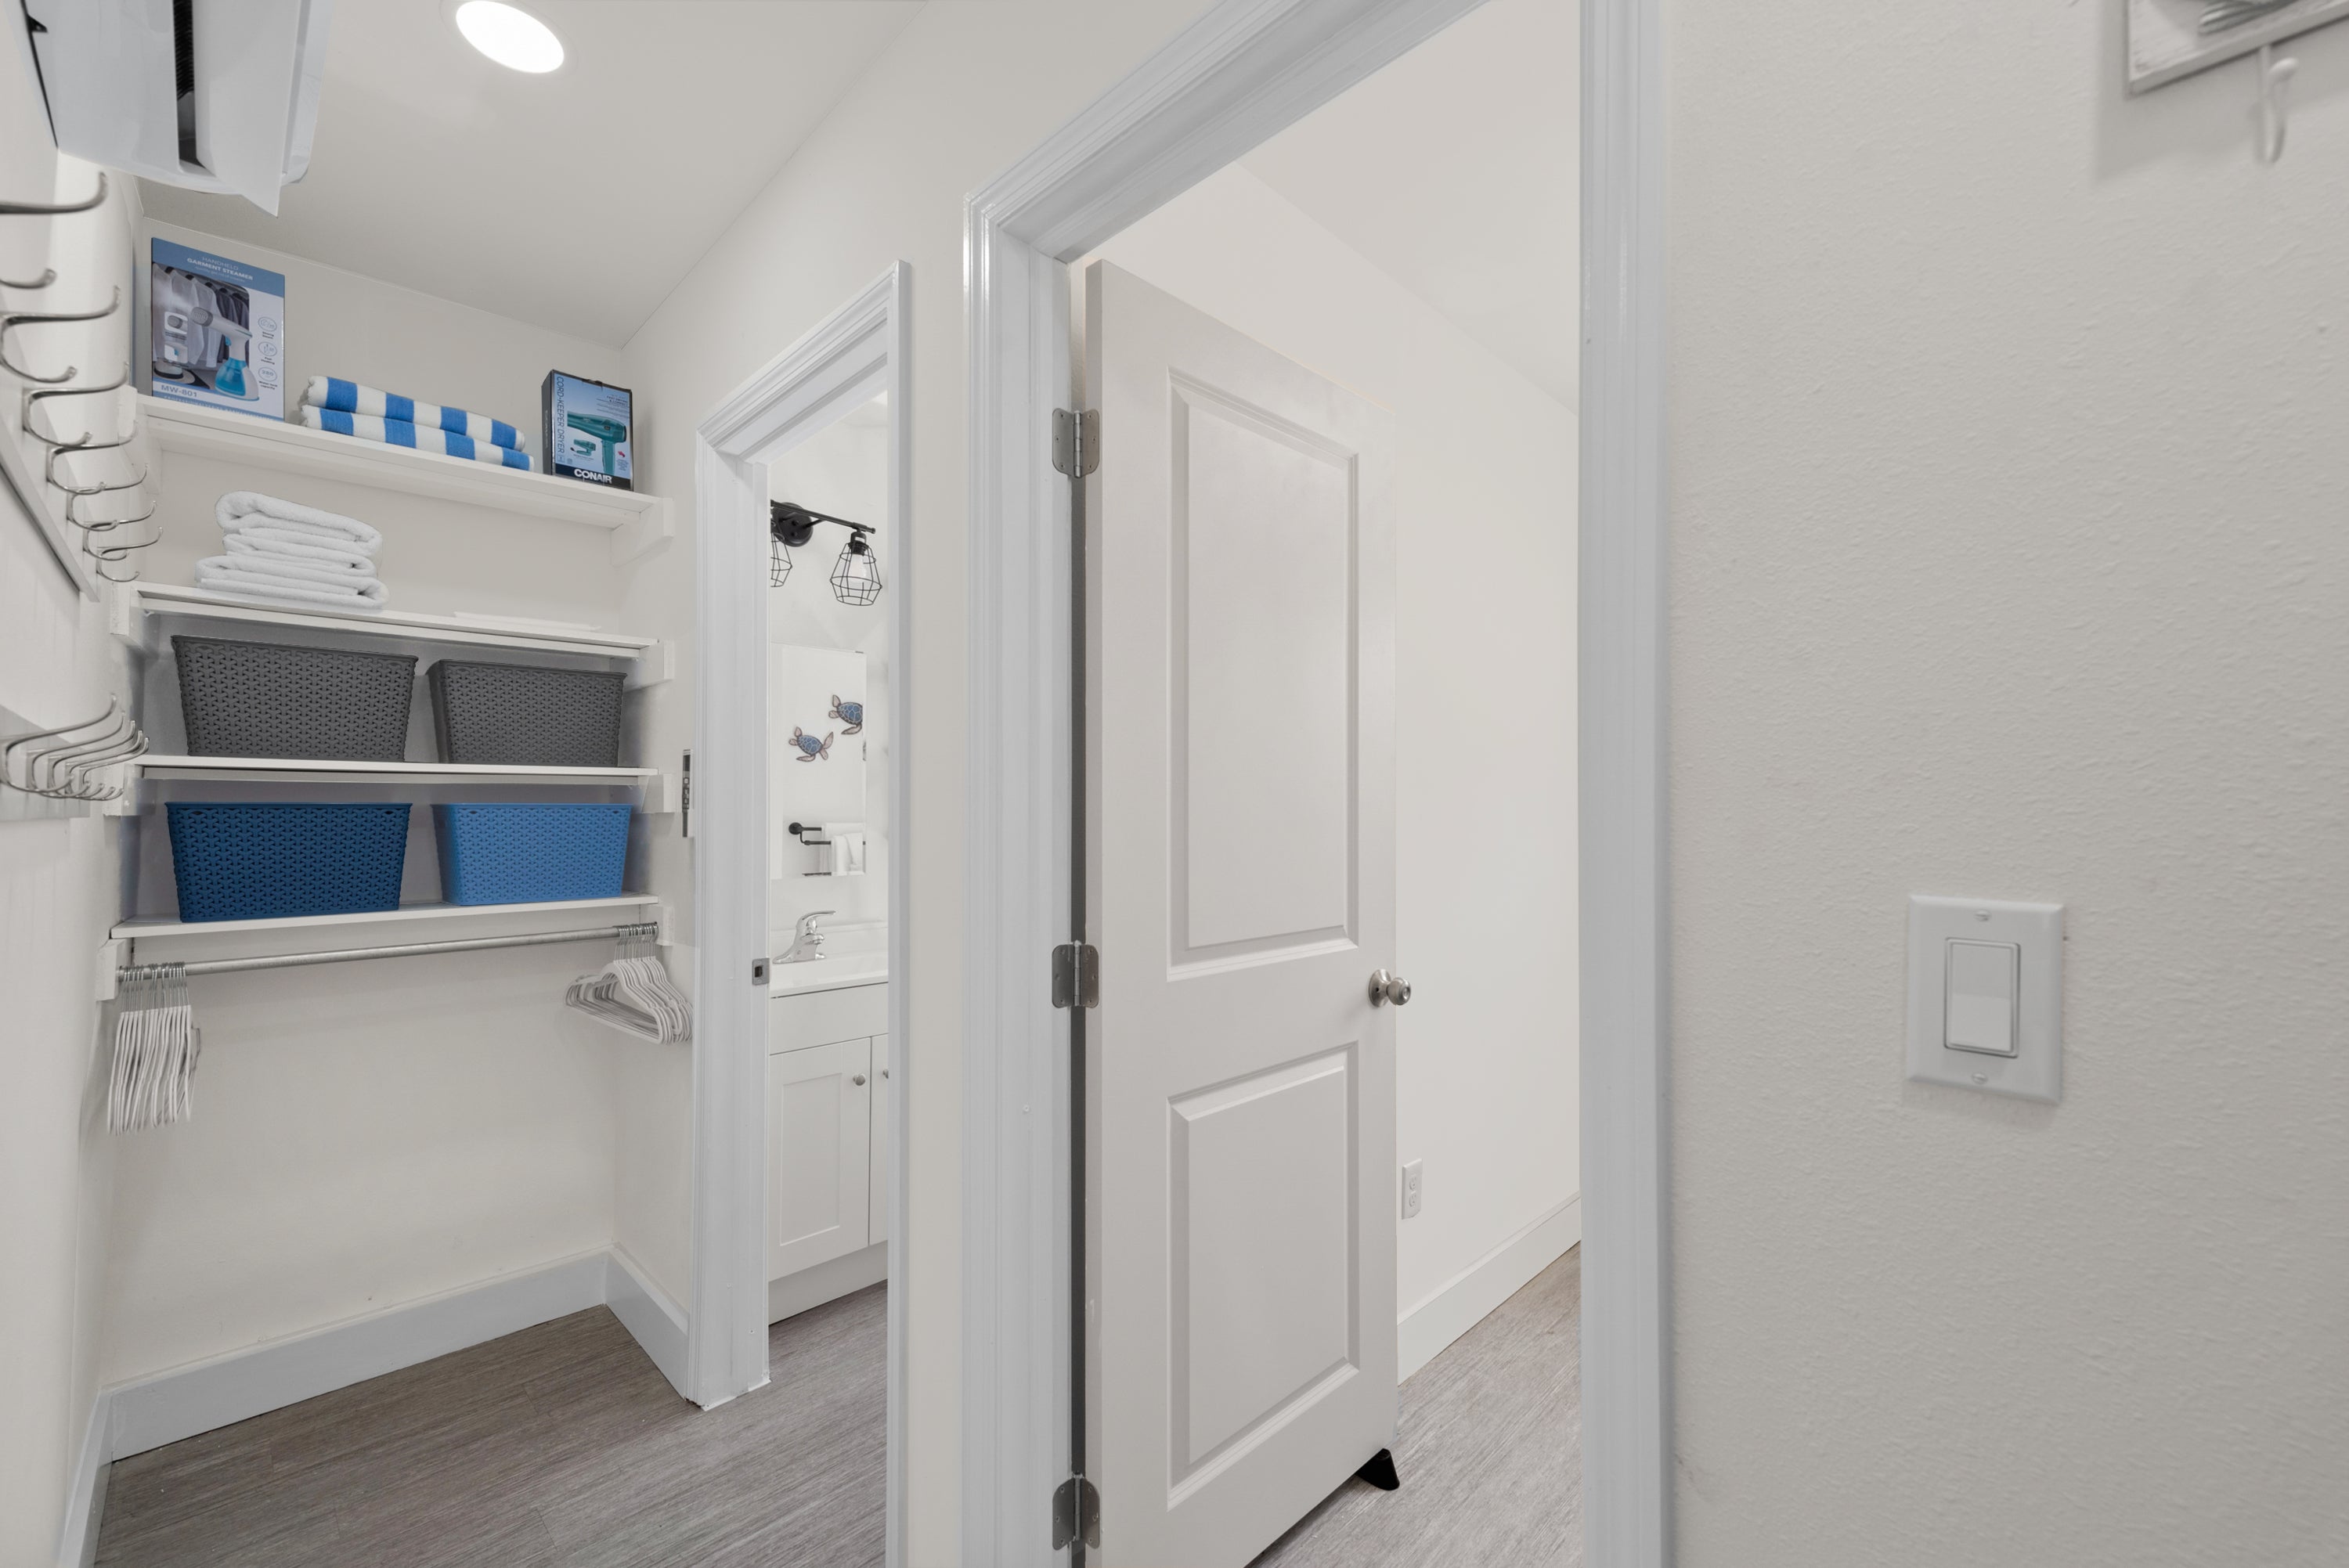 Hallway to Bathroom and office with storage